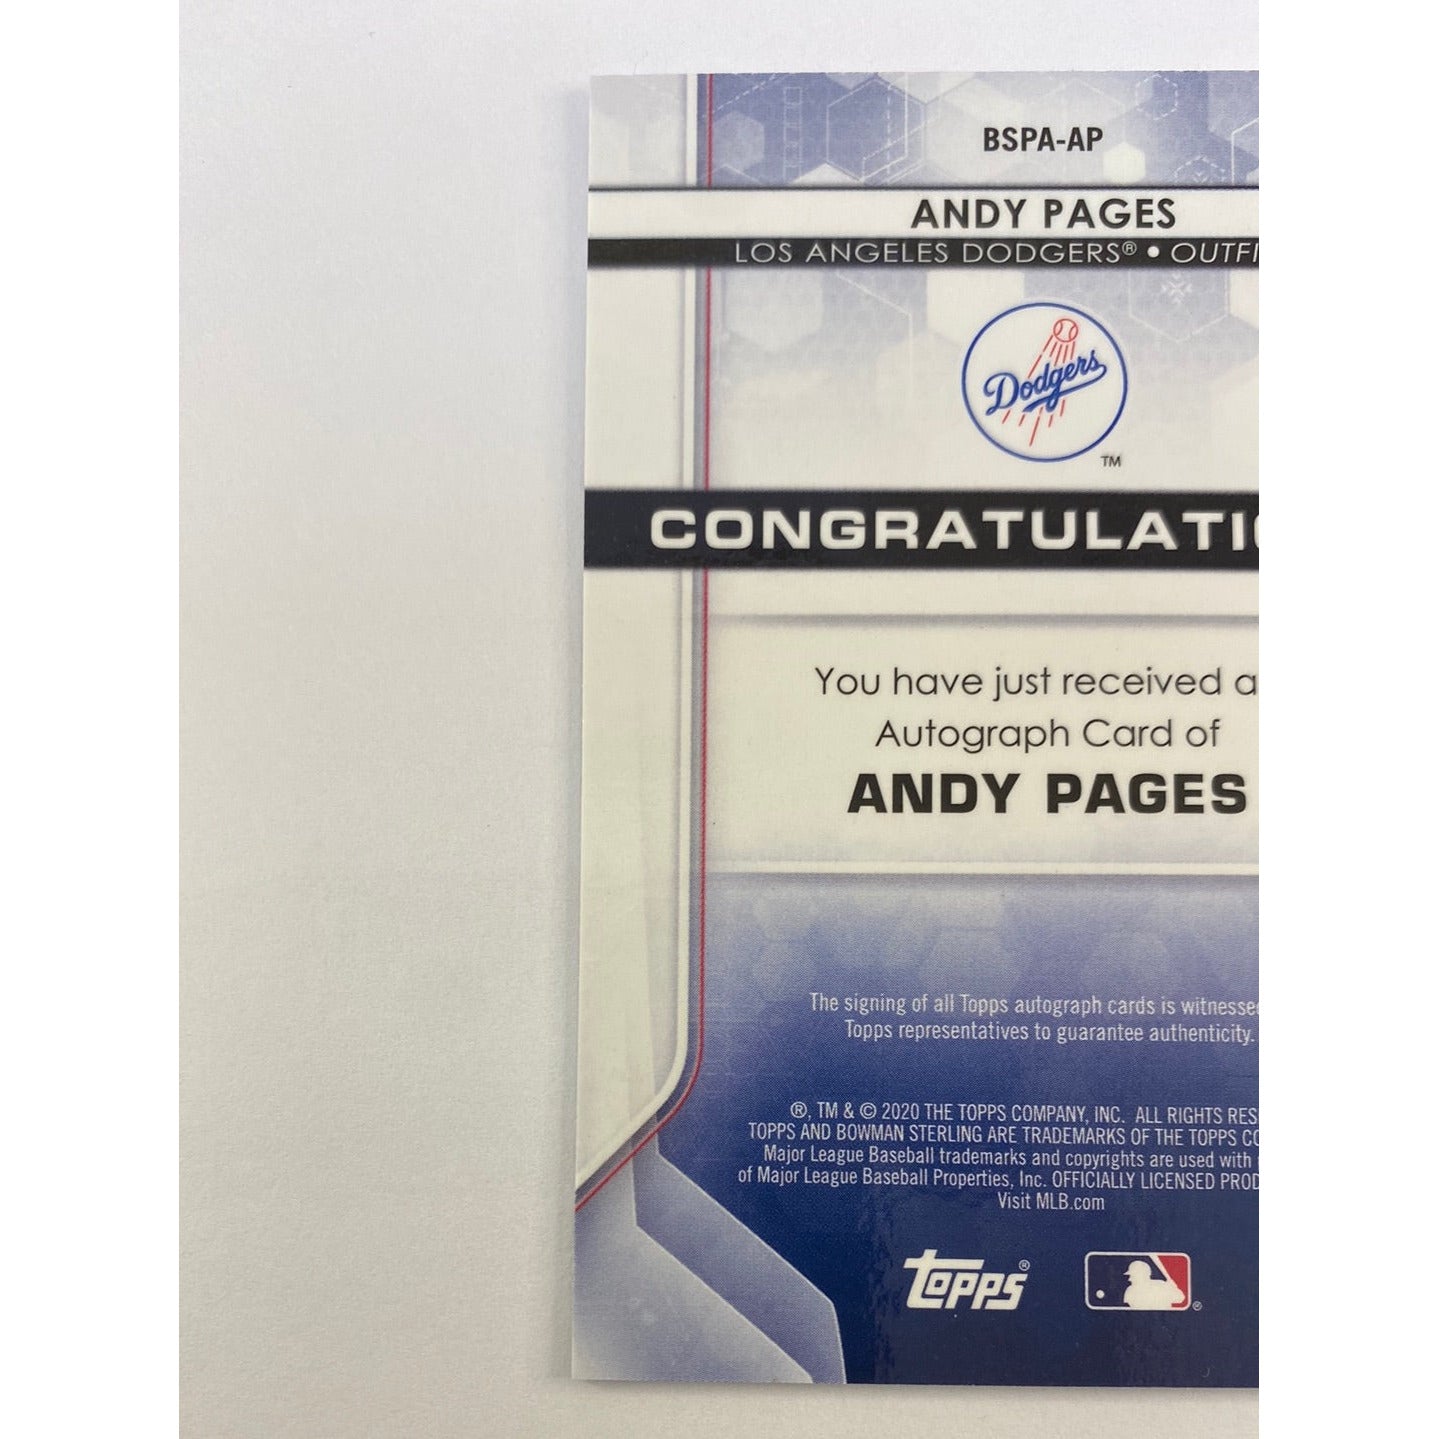 2020 Bowman Sterling Andy Pages Auto